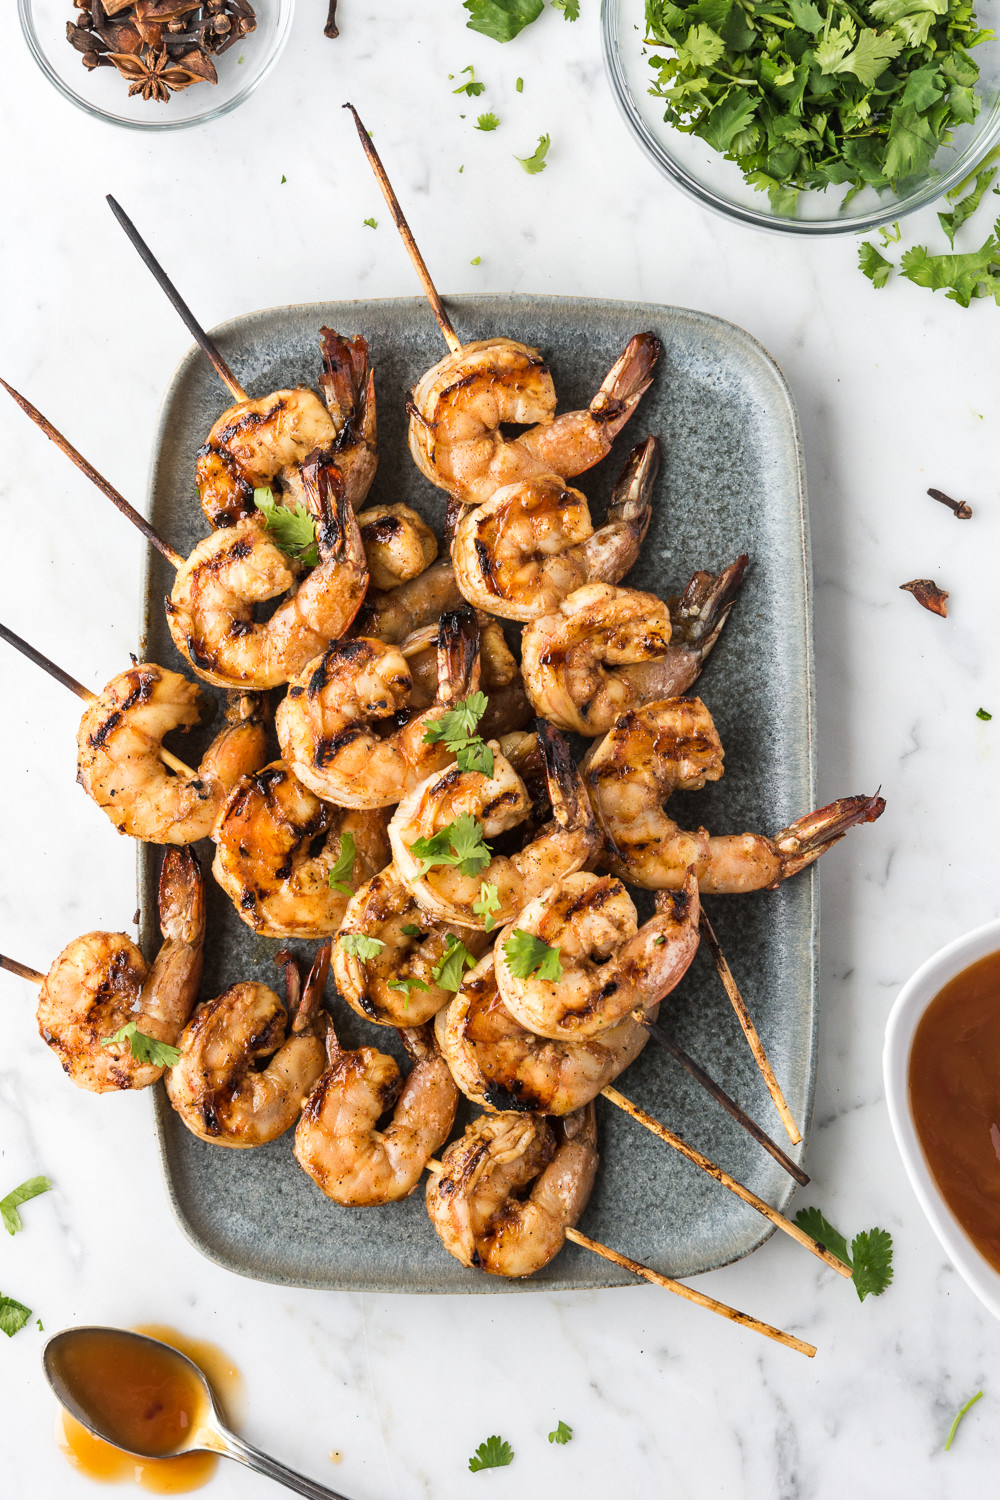 five spice grilled shrimp with sweet and sour sauce | With Spice